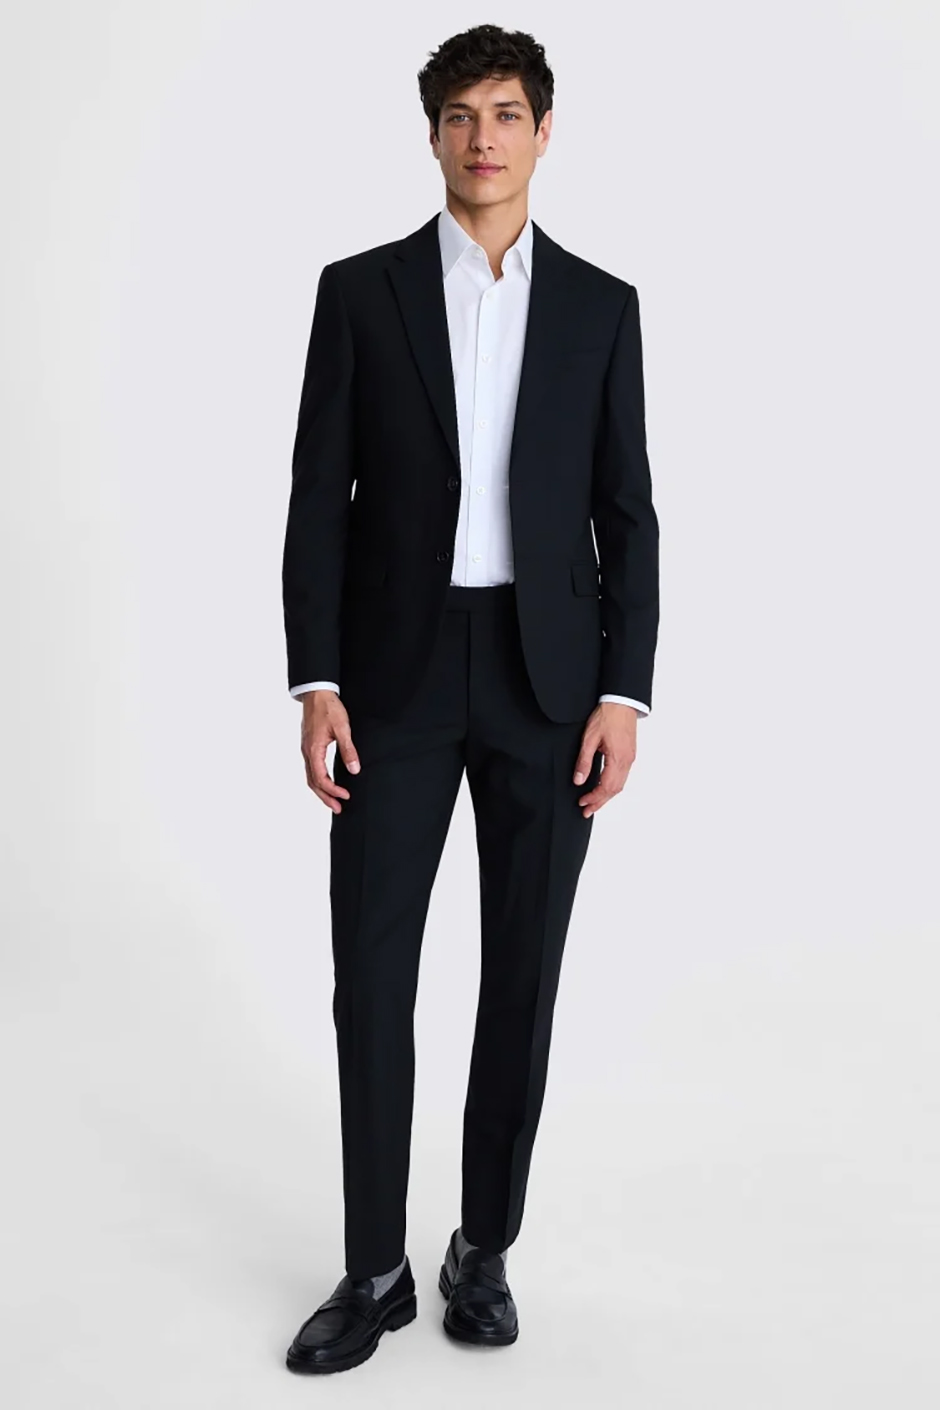 Slim fit black groomsmen suit from DKNY available at Moss Bros, modelled with white shirt under